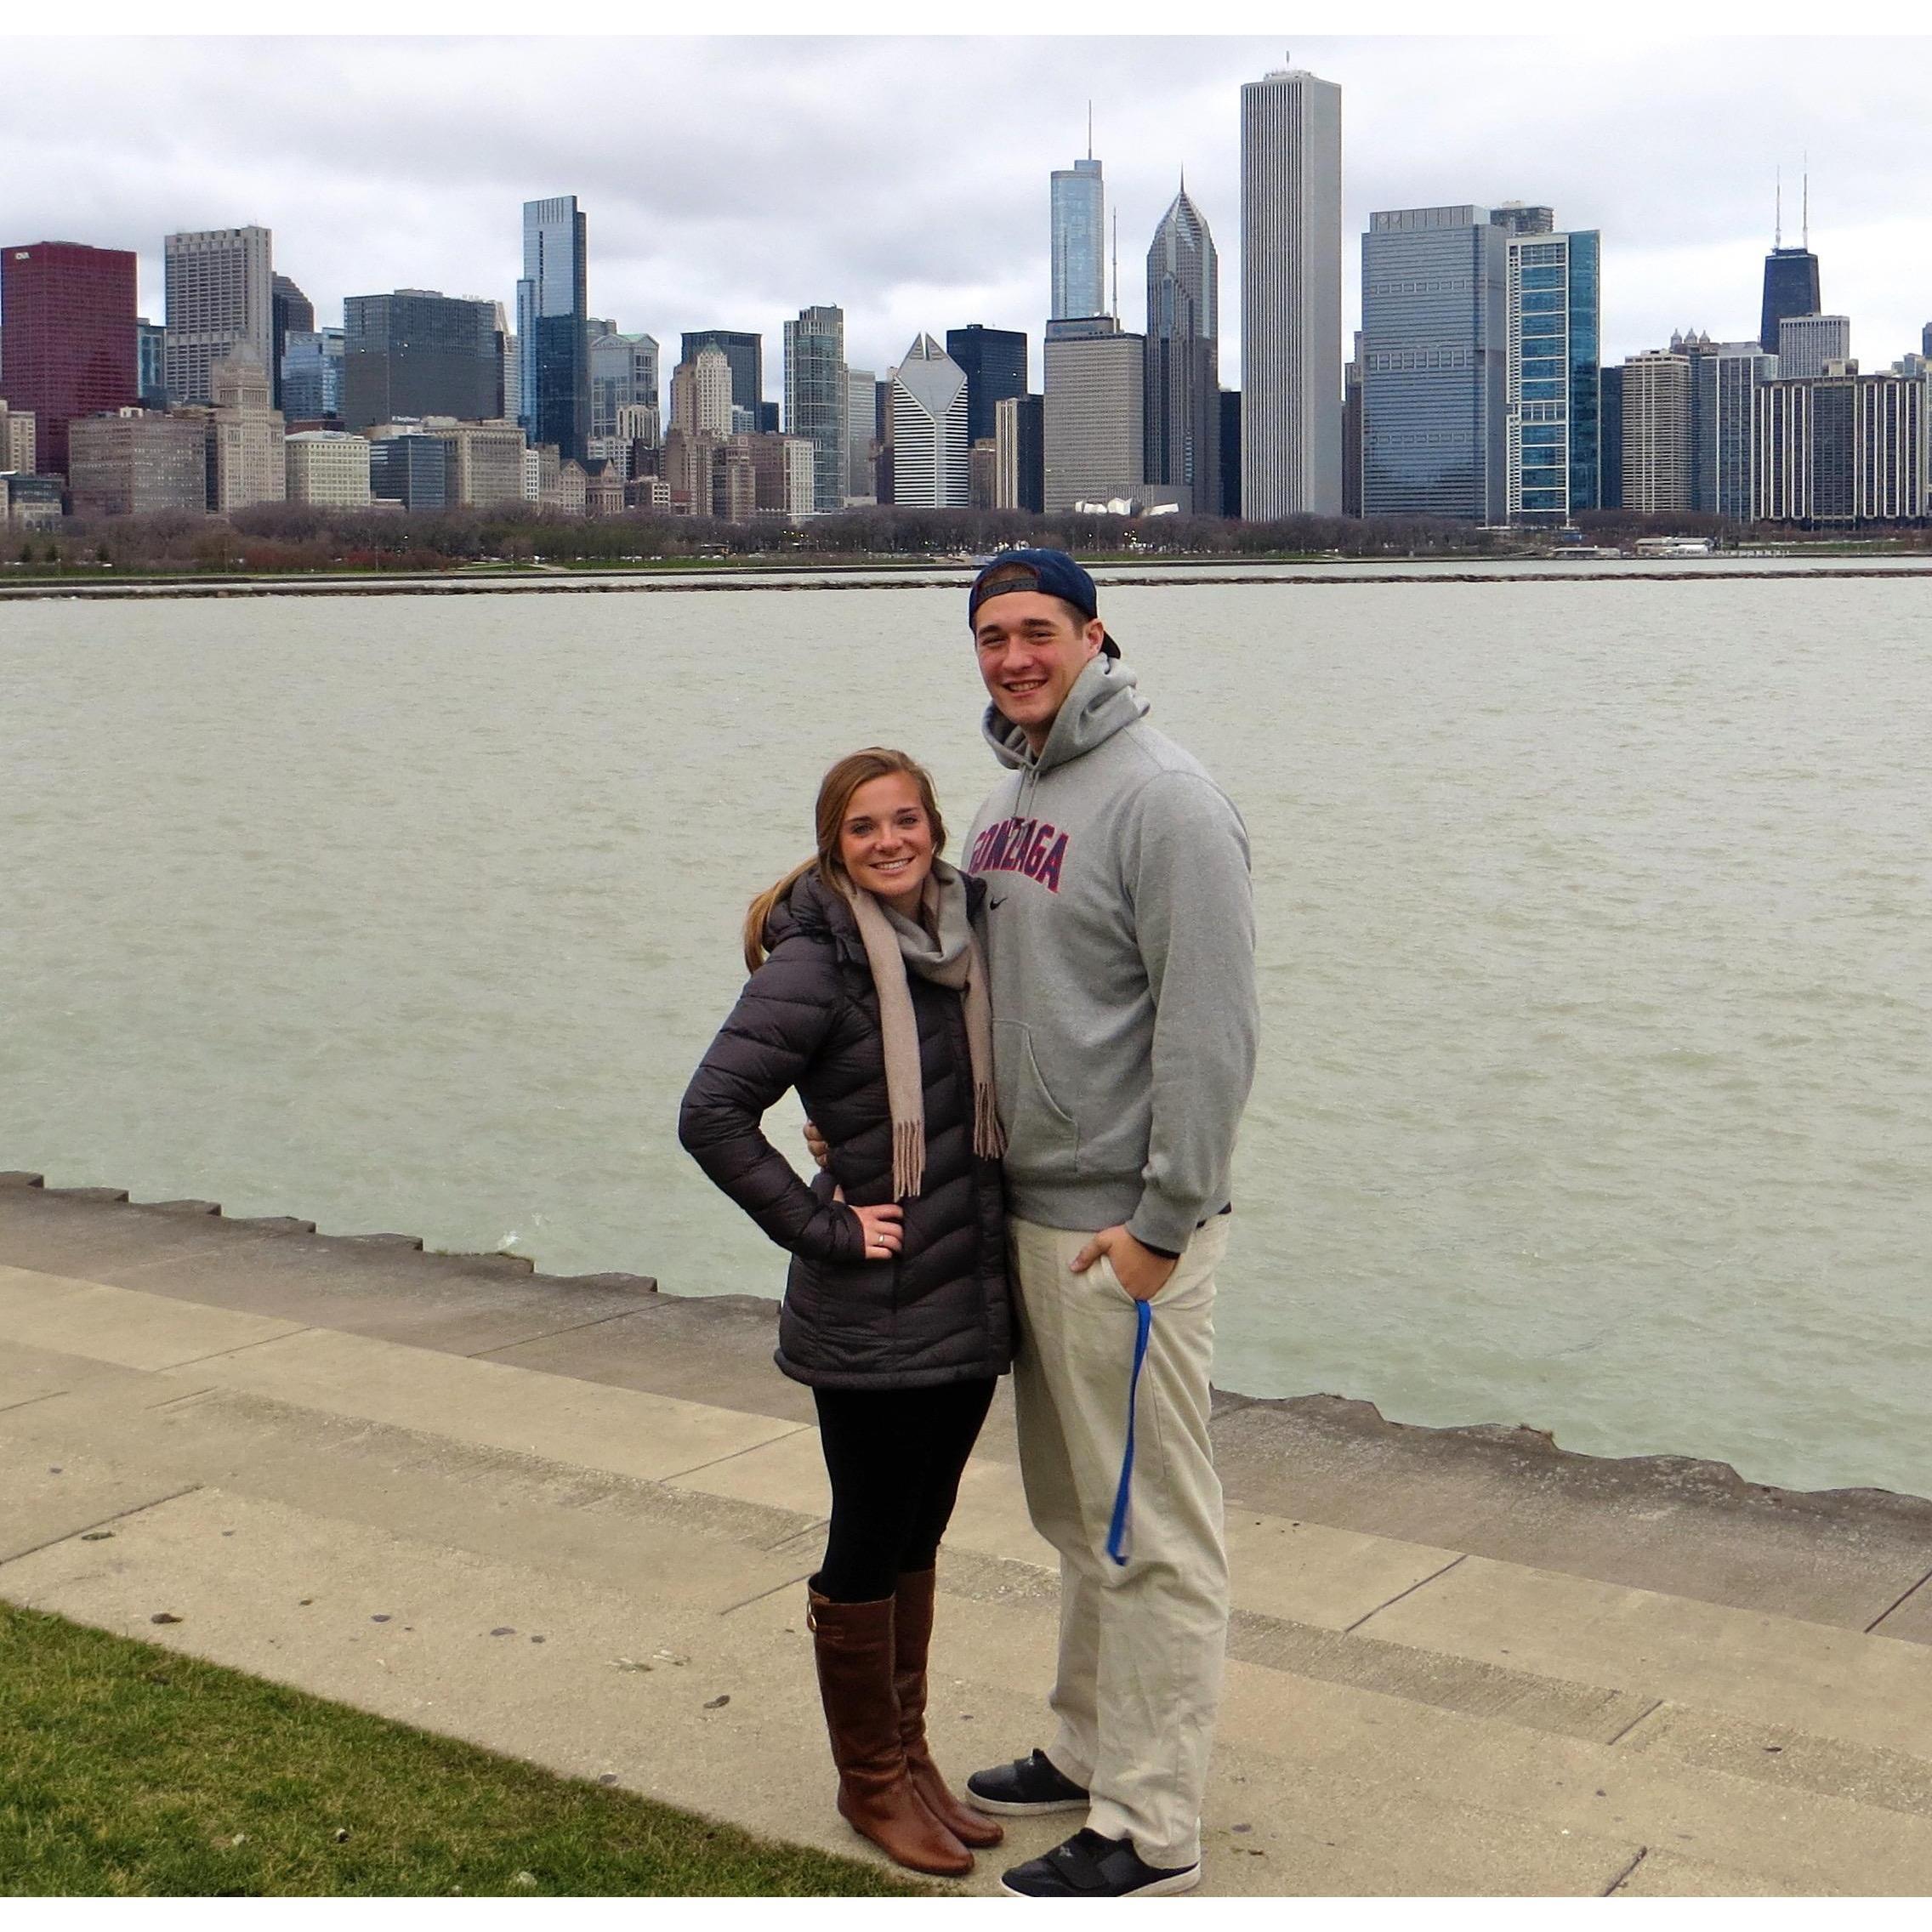 Freshman Year of College - Visiting Chris in Chicago (November 2012)